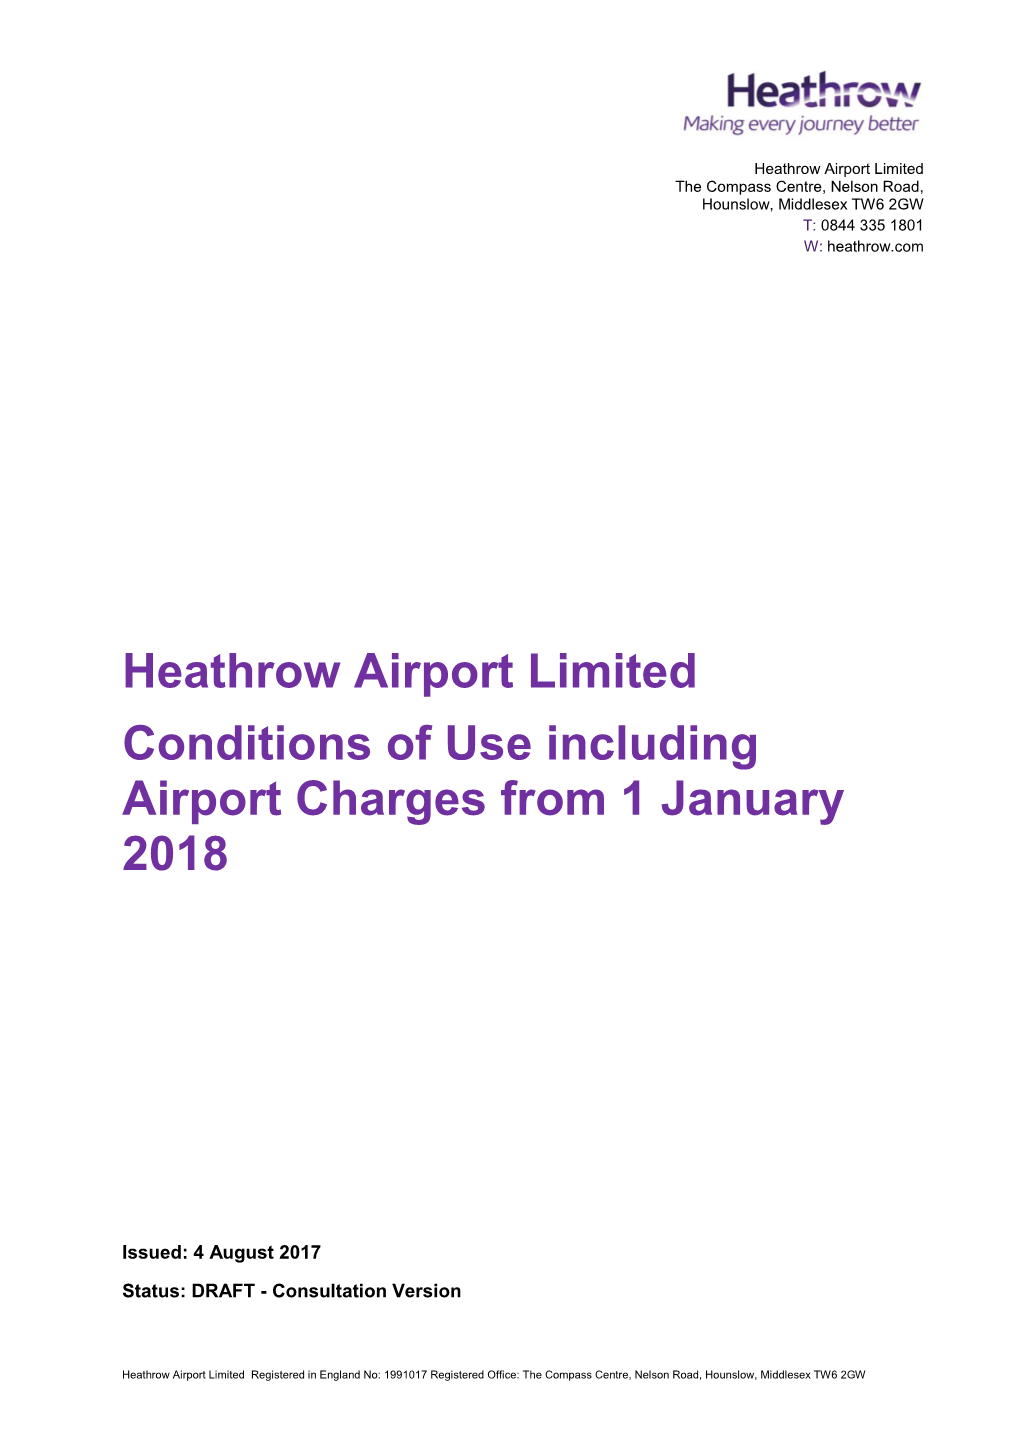 Heathrow Airport Limited Conditions of Use Including Airport Charges from 1 January 2018